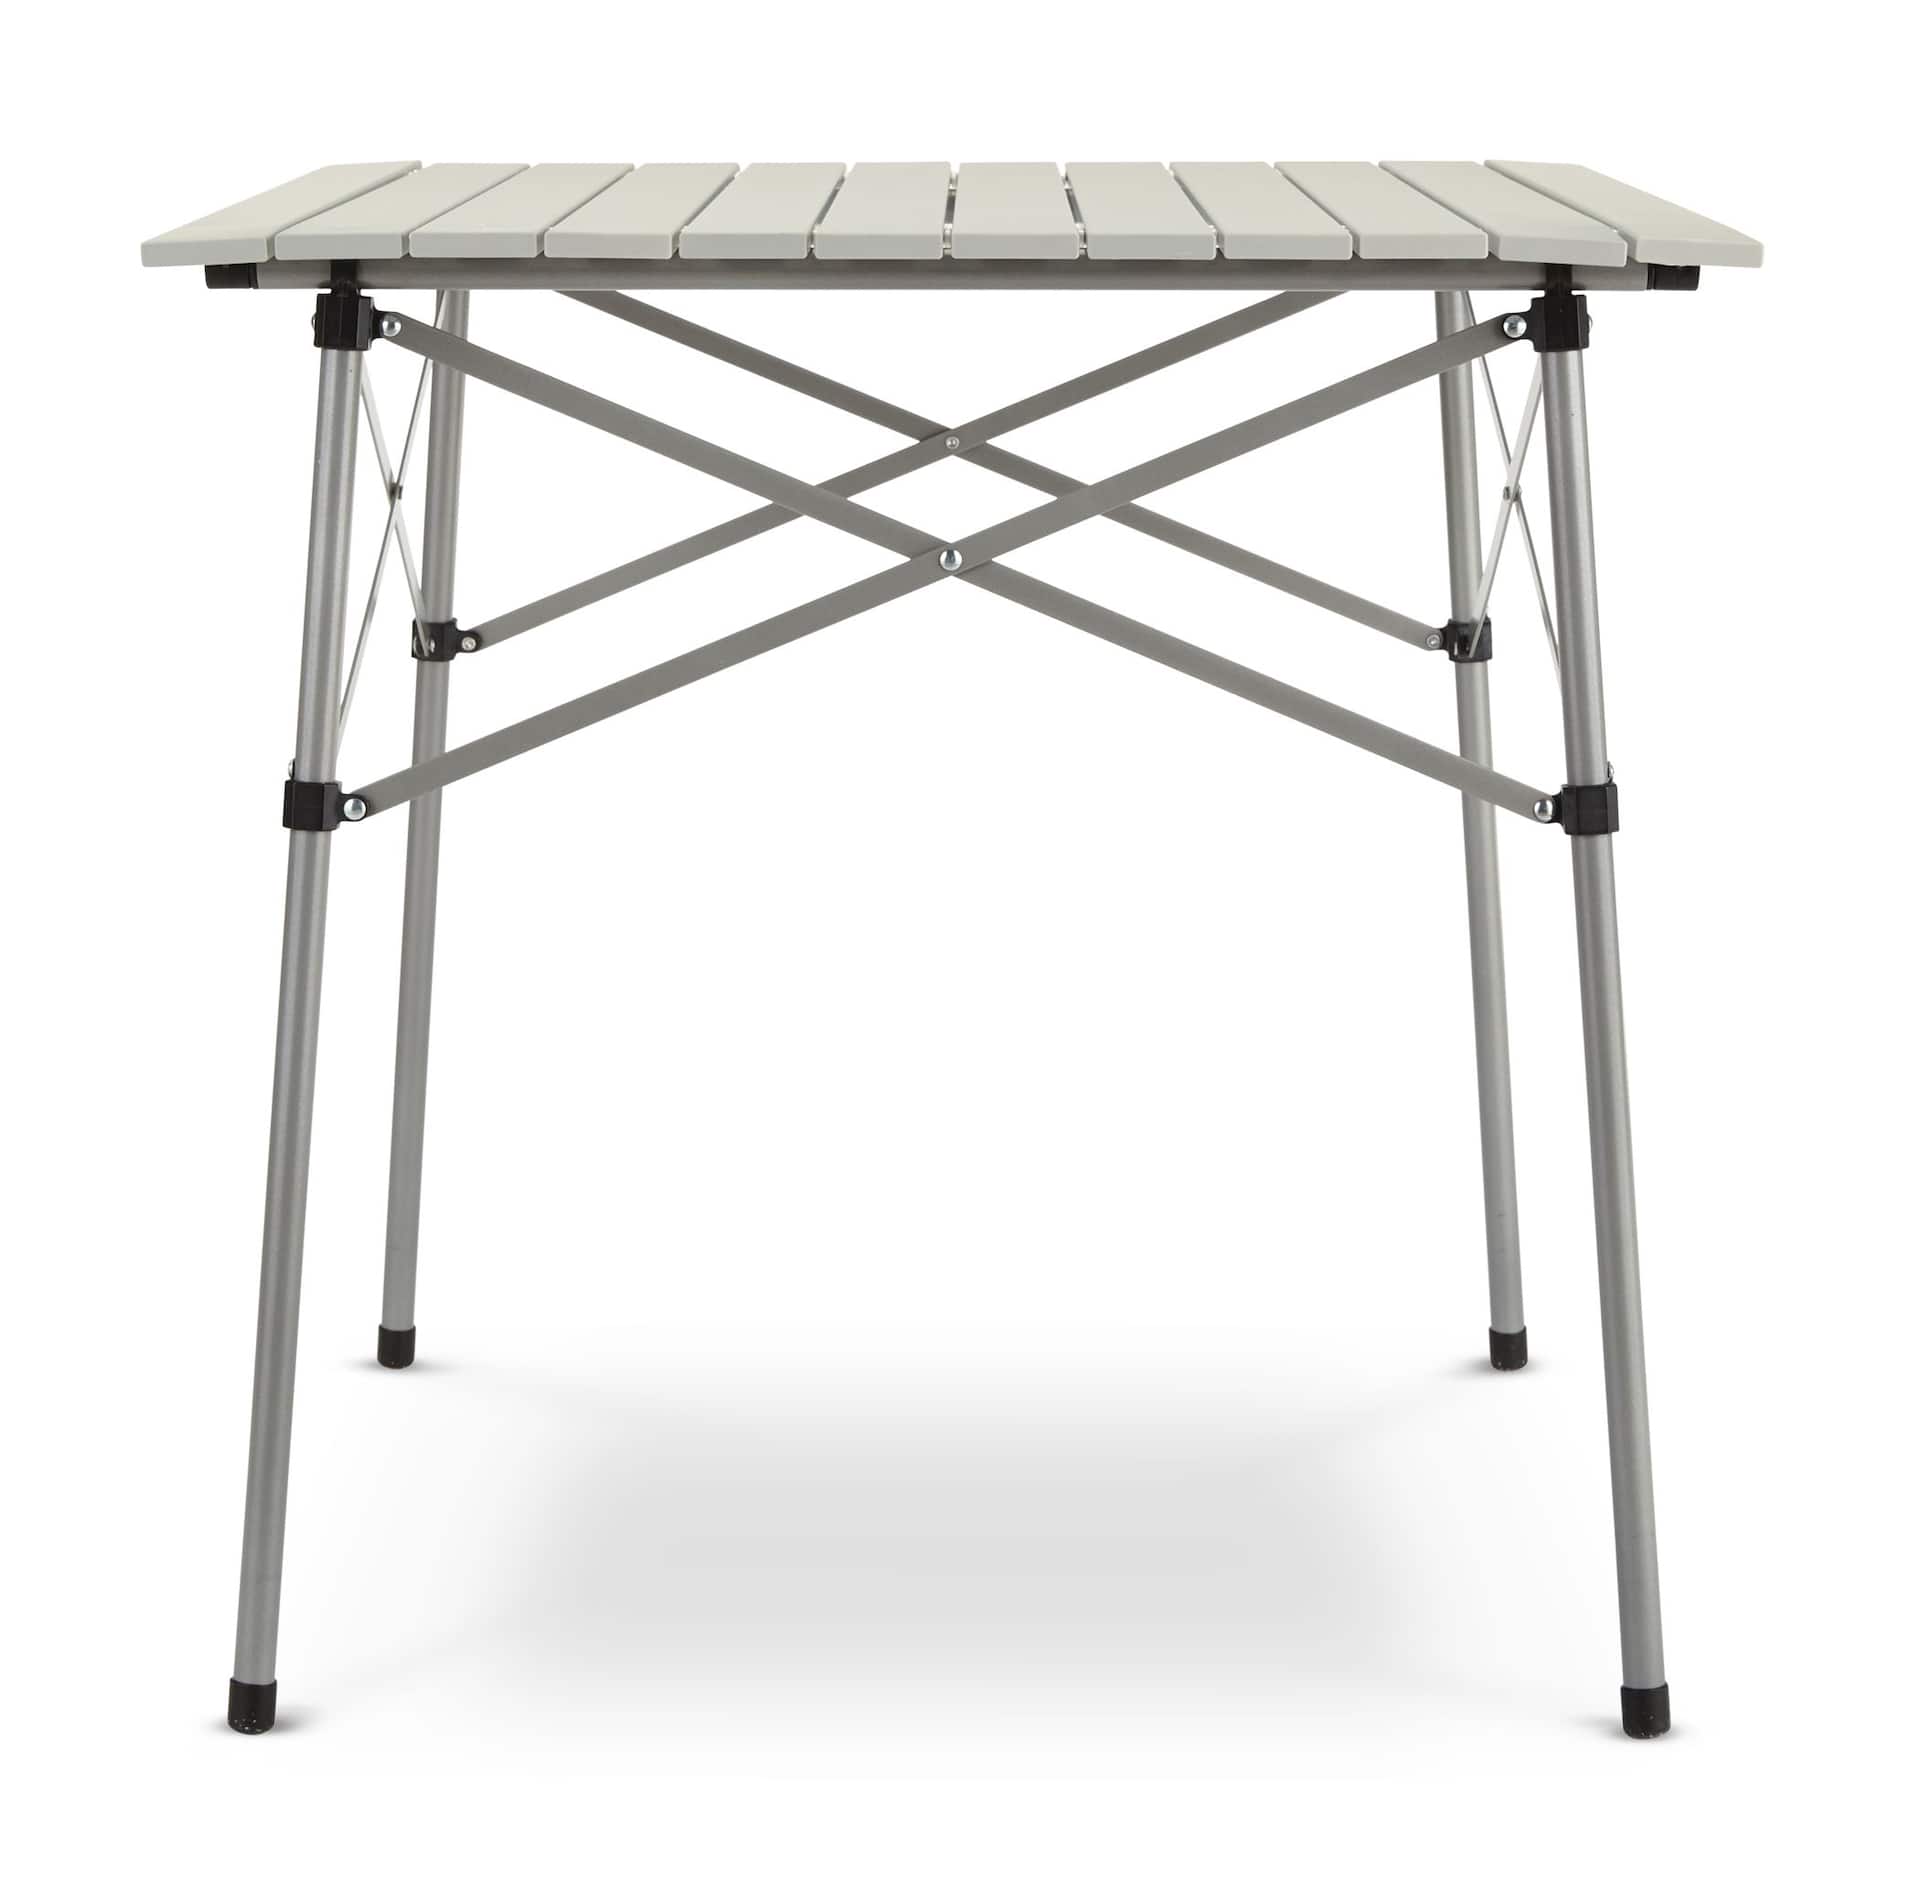 https://media-www.canadiantire.ca/product/playing/camping/camping-furniture/0765543/woods-quad-table-9781871f-f272-4018-8d45-287d45dca277-jpgrendition.jpg